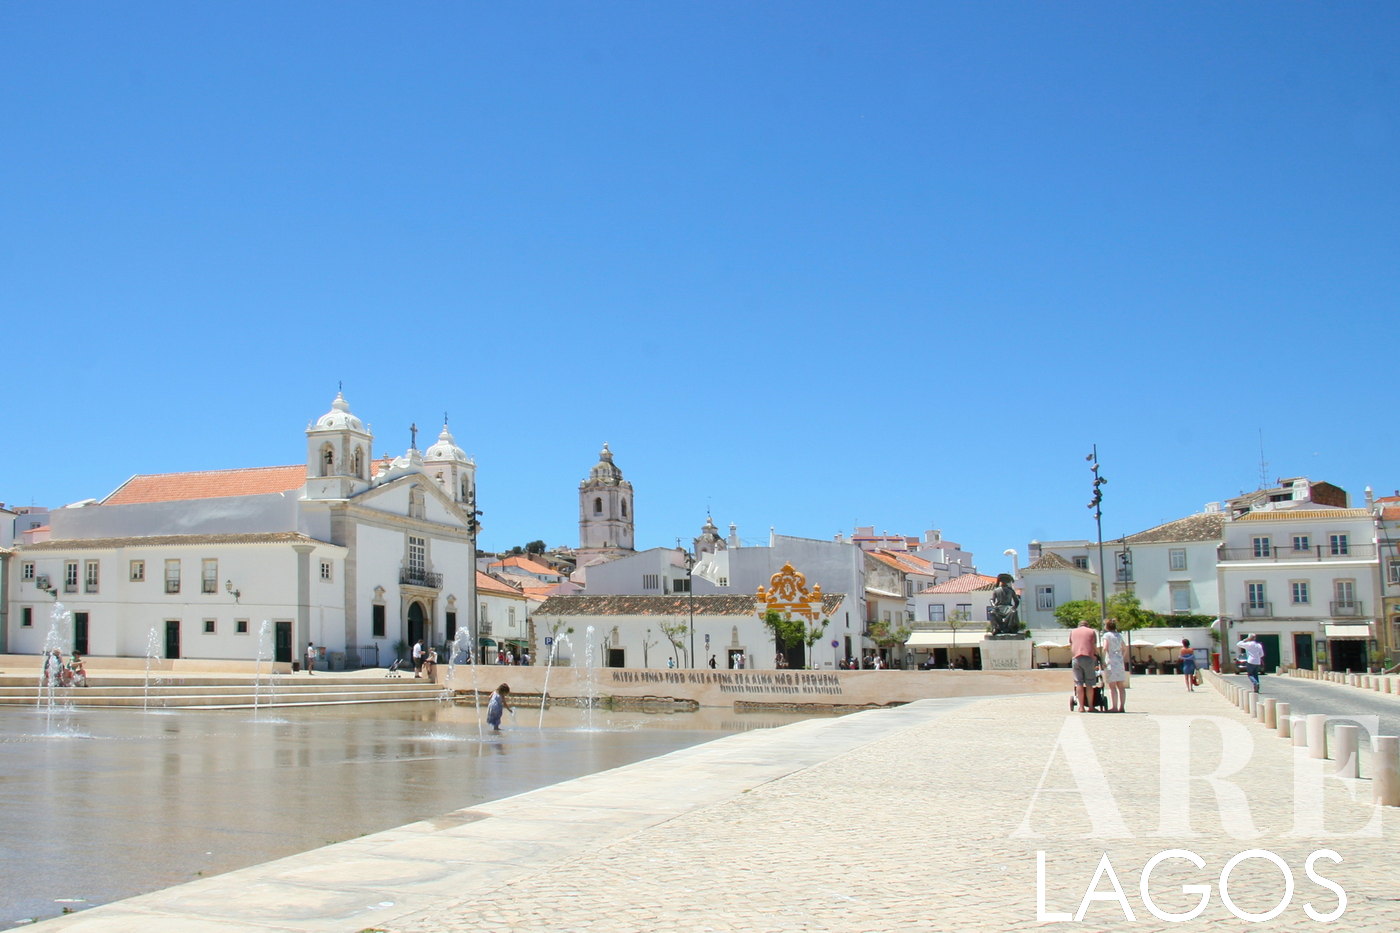 Reasons to Reside in Lagos, Portugal